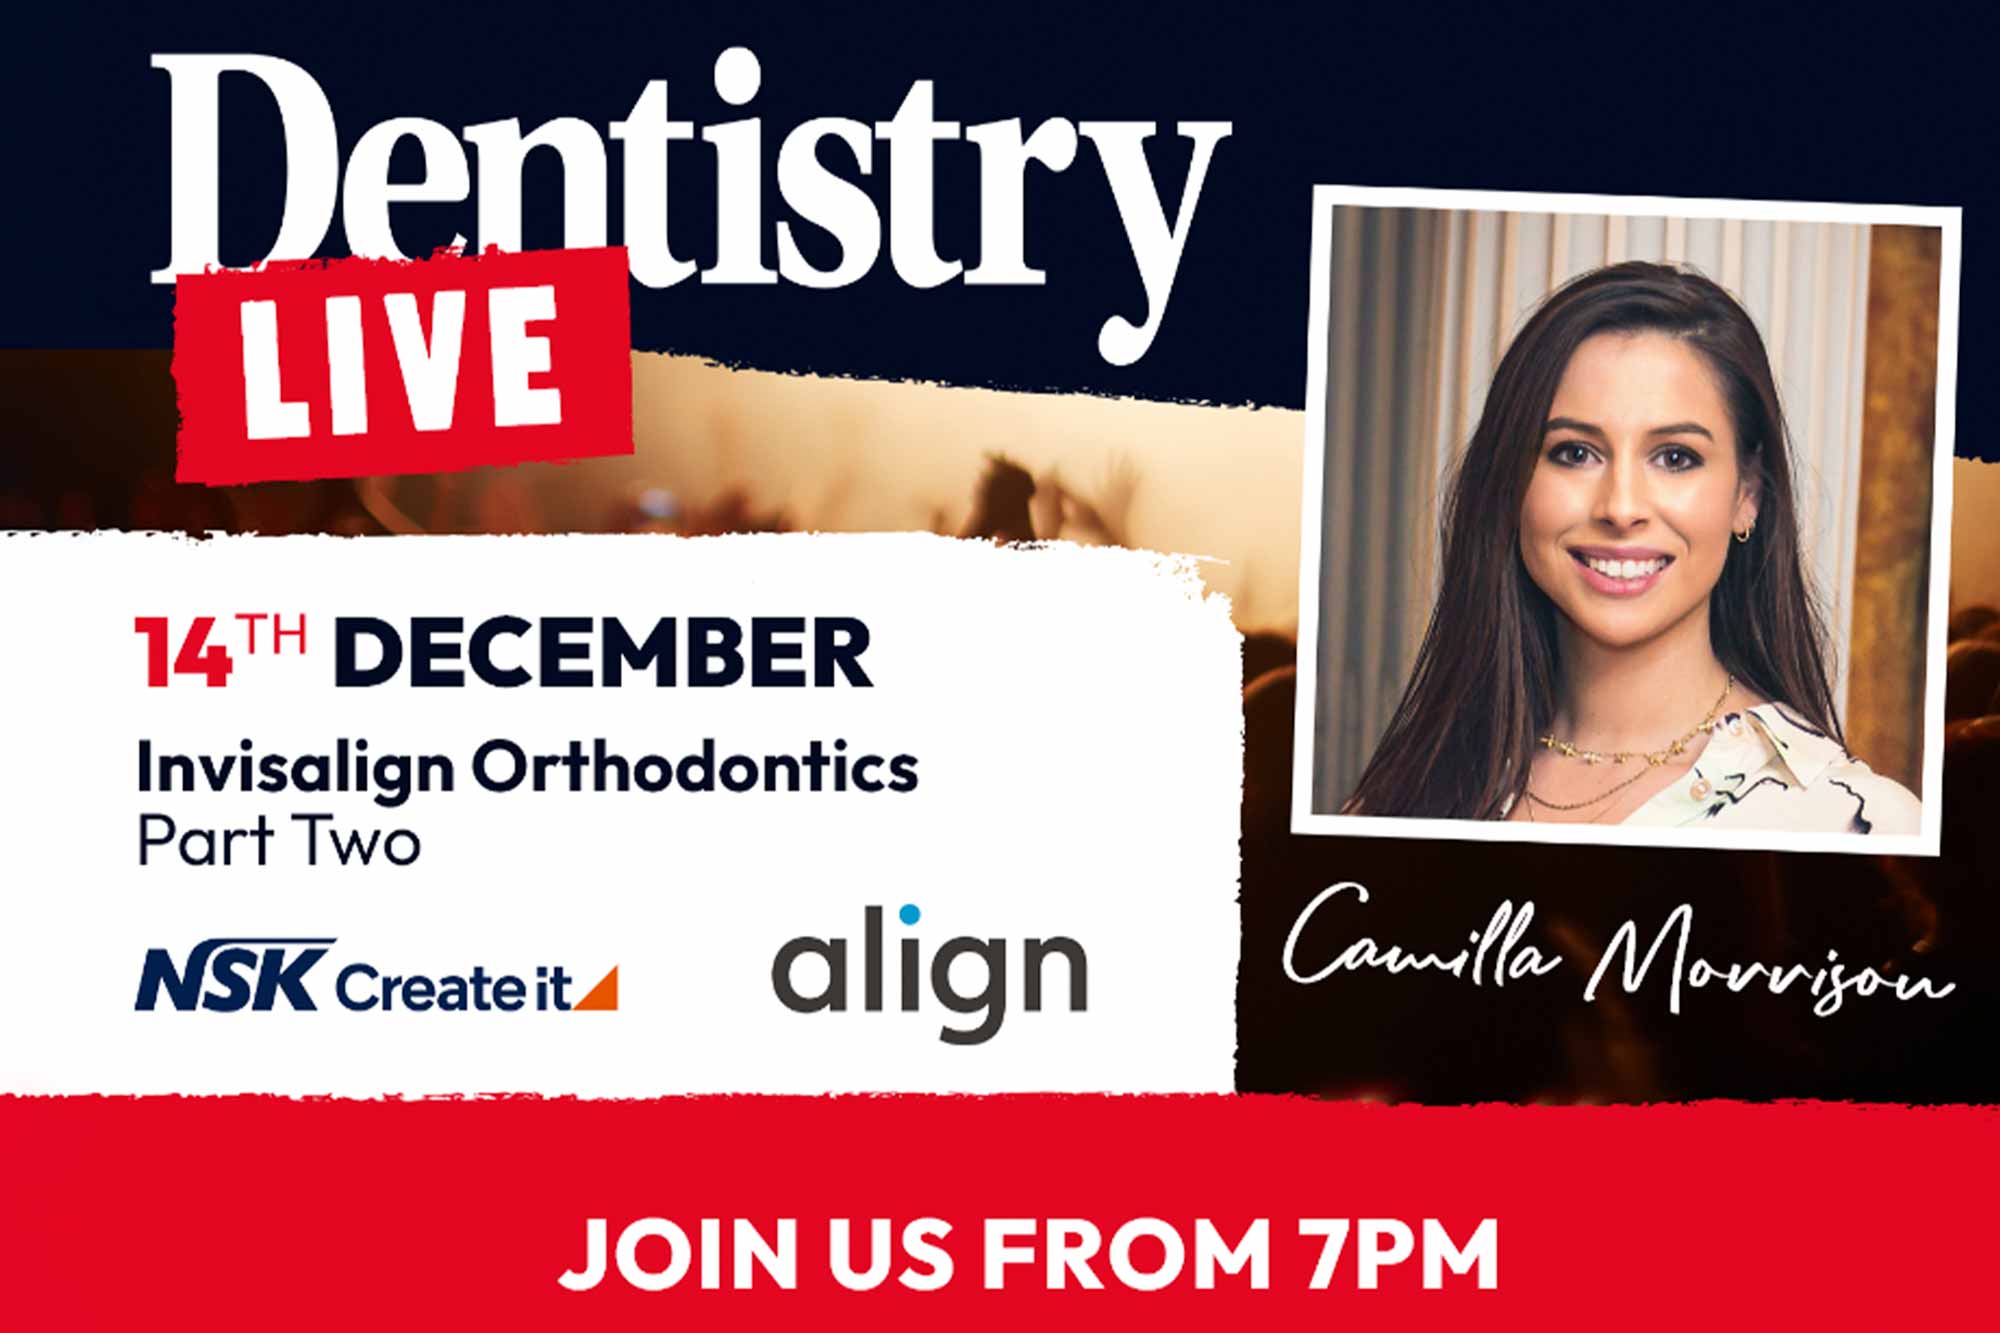 Join Camilla Morrison on Thursday 14 December at 7pm for part two of her Dentistry Live broadcast on Invisalign orthodontics.